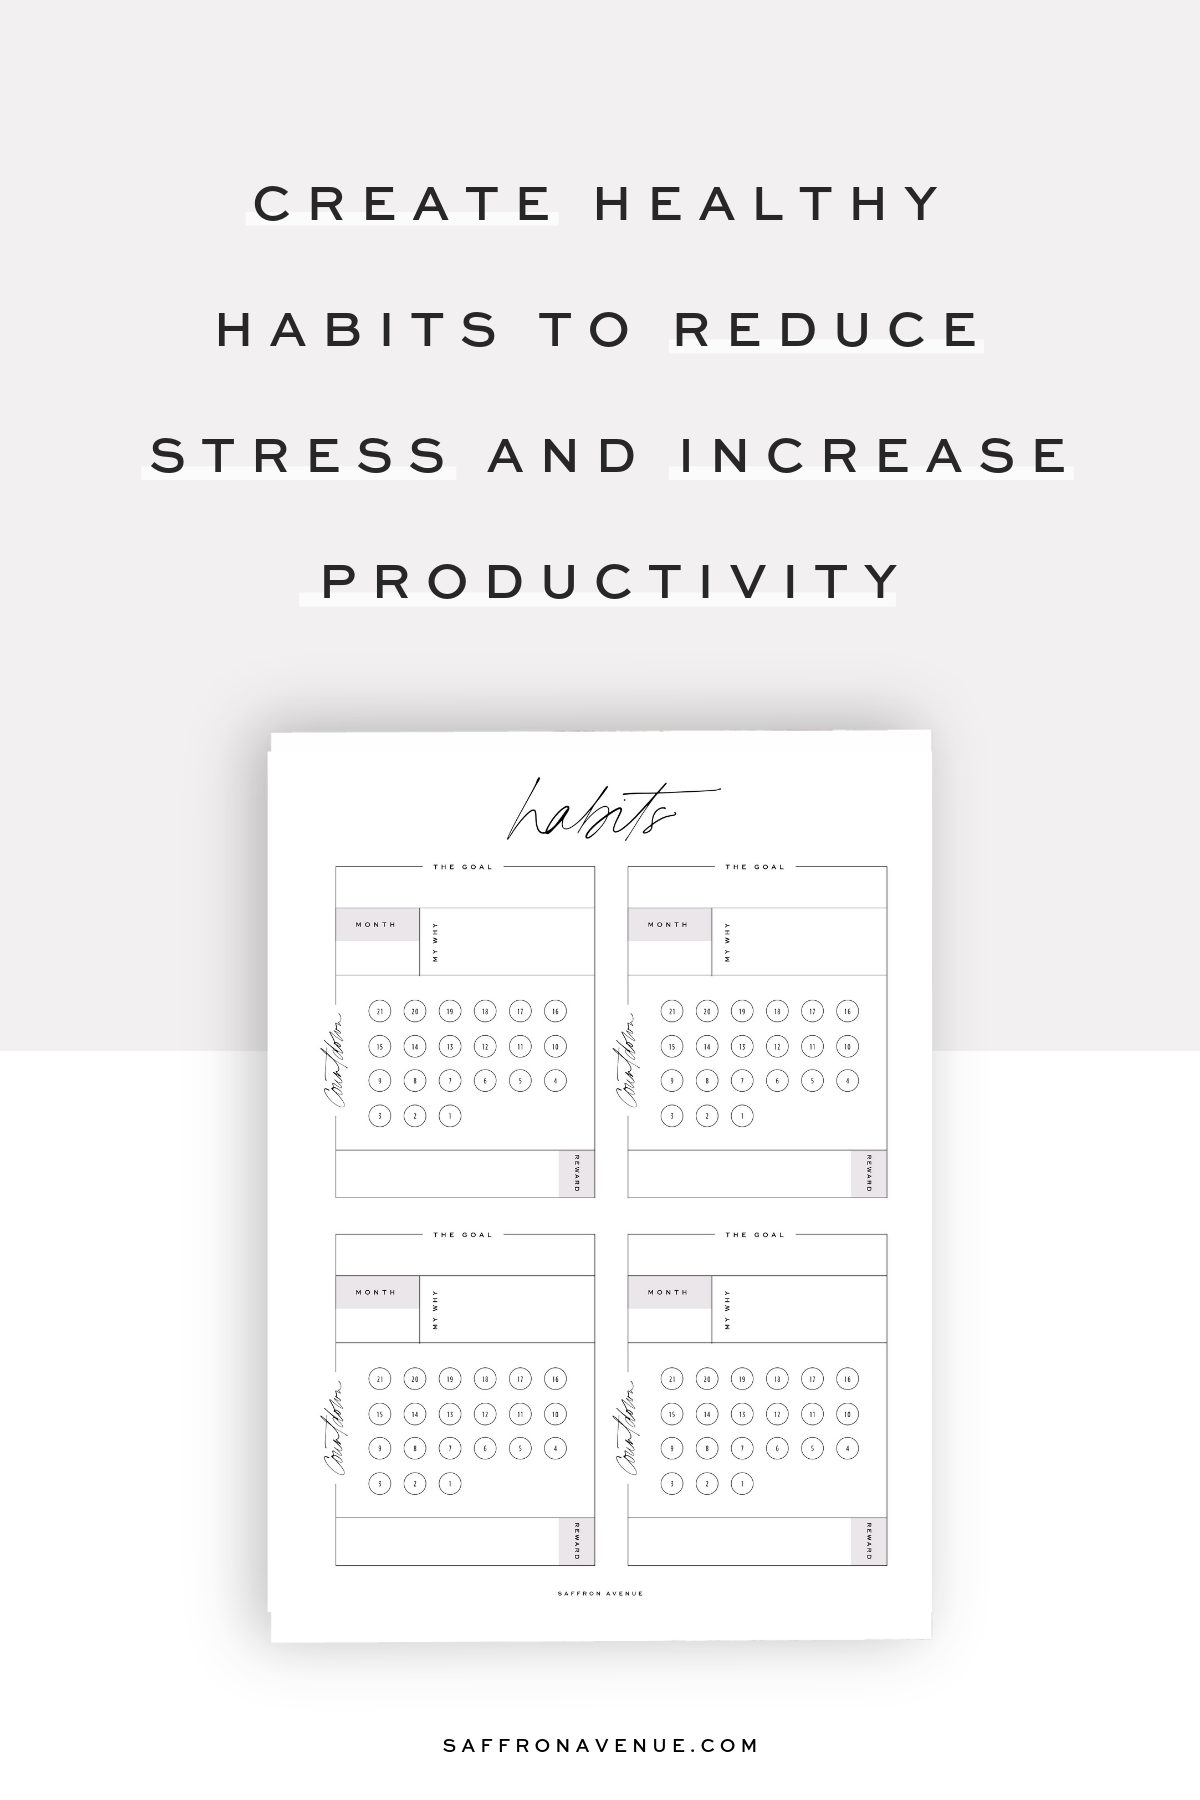 How to reduce stress and increase productivity